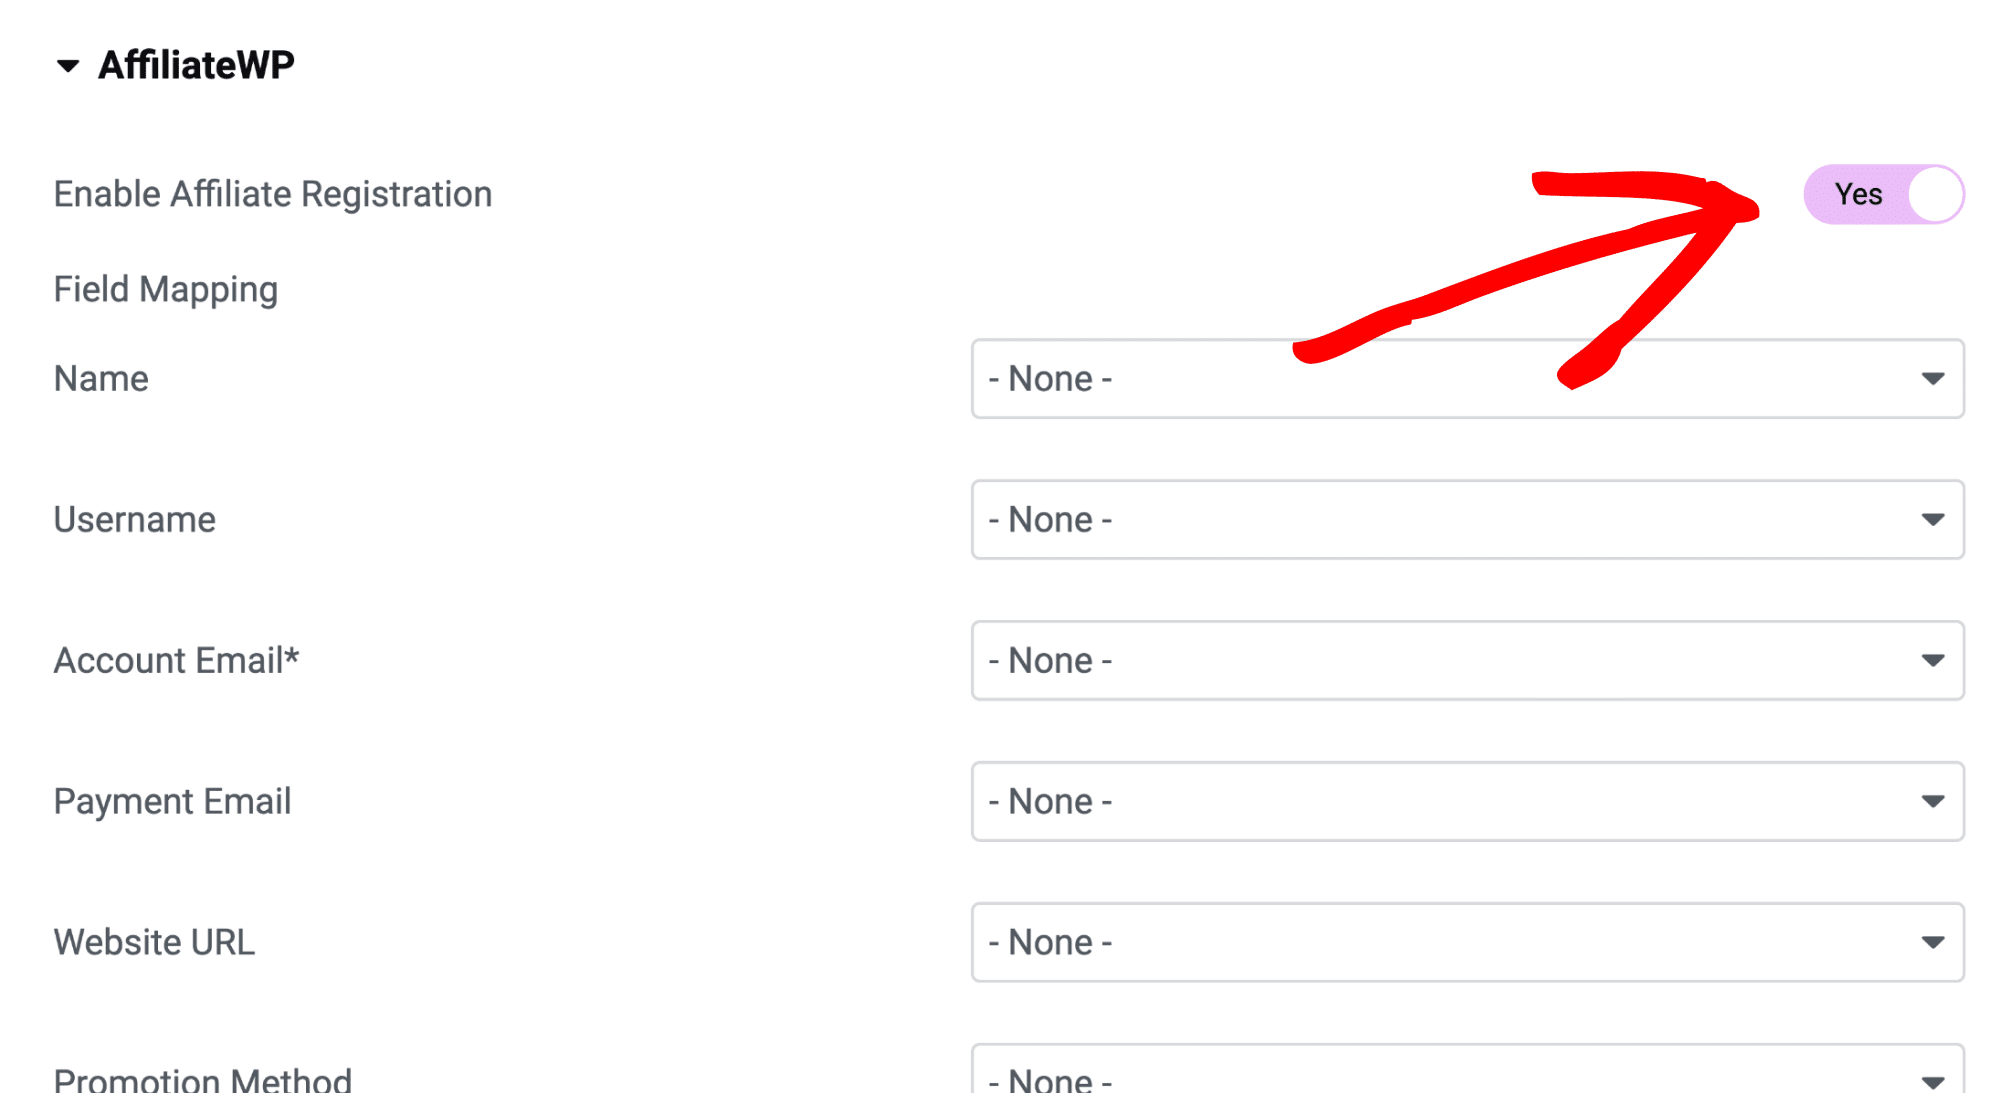 Enabling the Affiliate Registration toggle switch